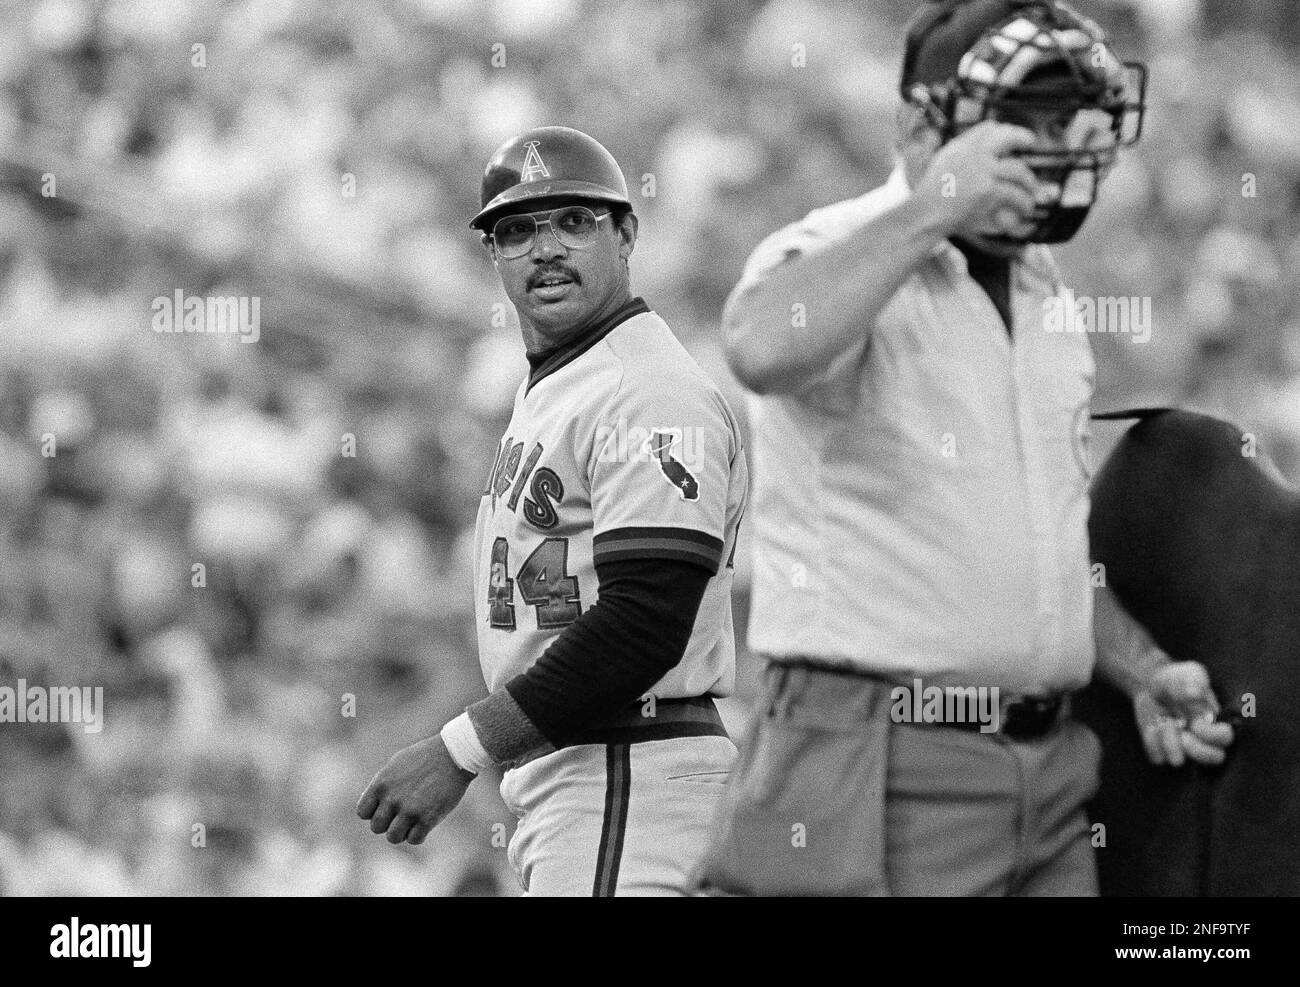 Reggie Jackson (44) of the California Angels looks over his shoulder as he questions the strike three call by home plate umpire Dale Ford, at Arlington, Texas, June 20, 1983. Jackson struck out his first two at bats against the Texas Rangers. (AP Photo/David Breslauer) Stock Photo